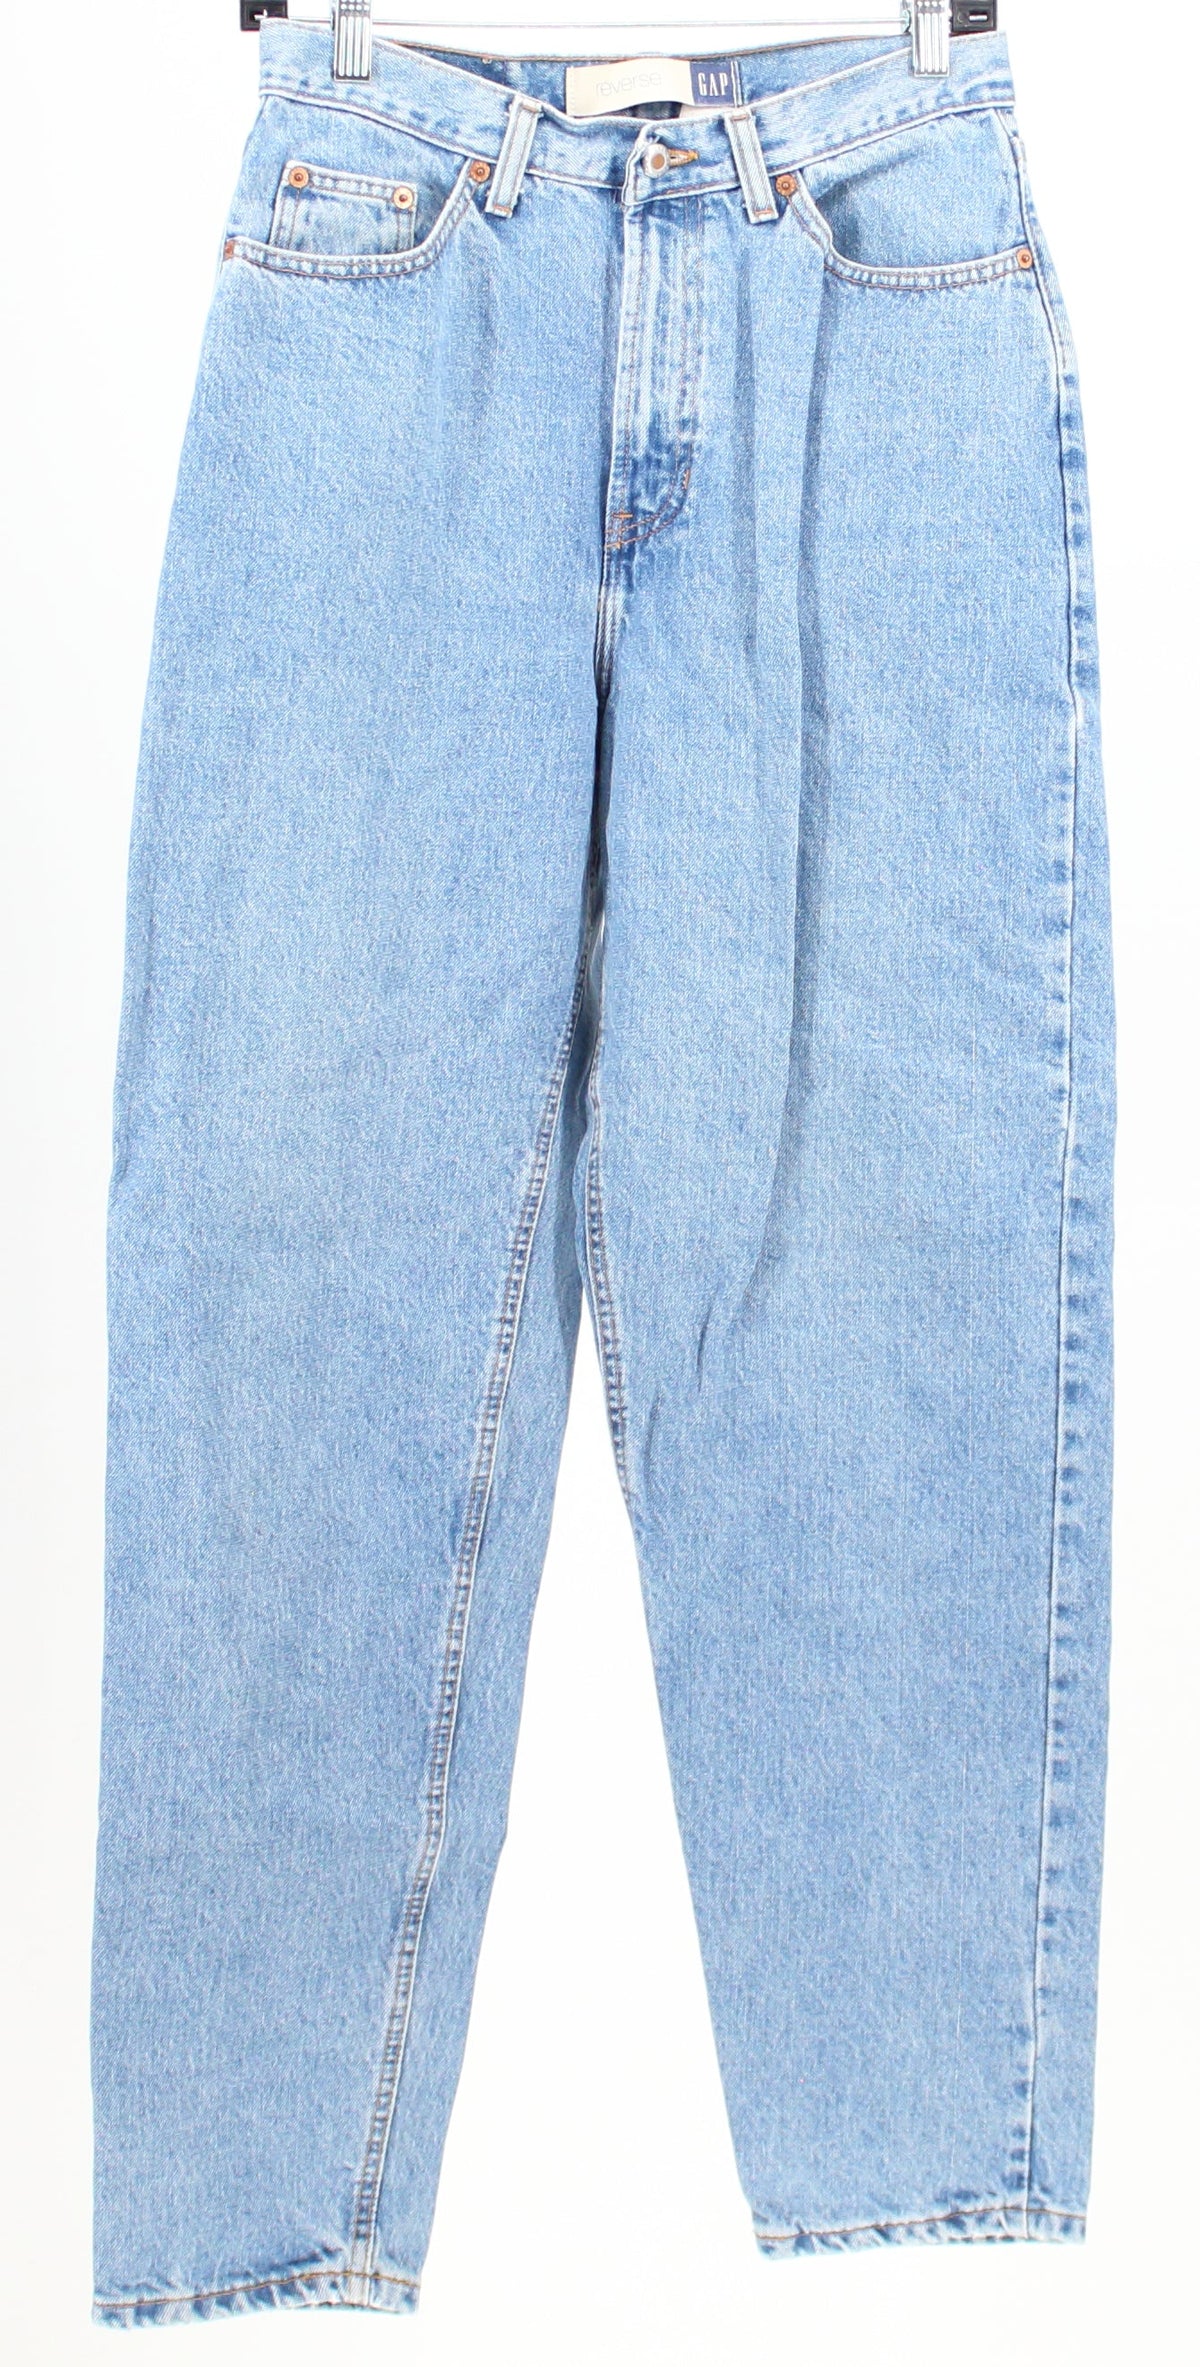 Gap Light Washed Reverse Style Jeans